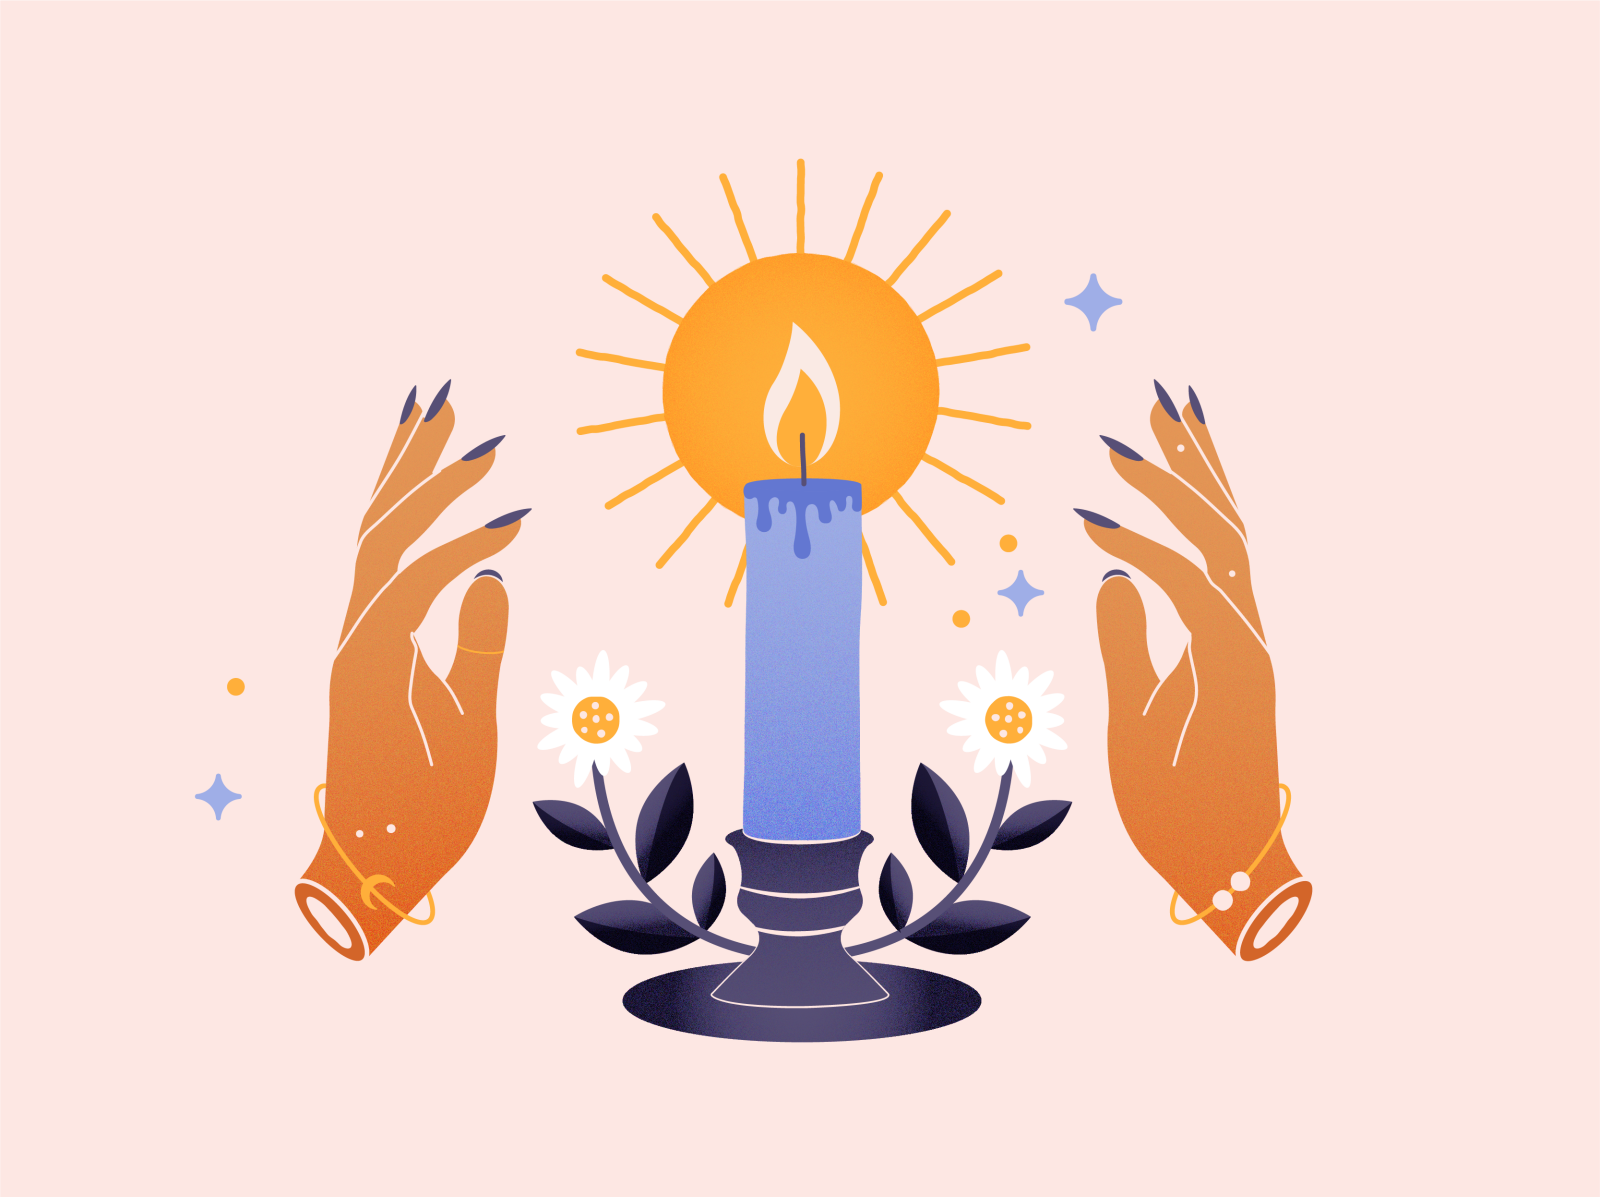 Candle Spell by Darcy Wuerdeman on Dribbble